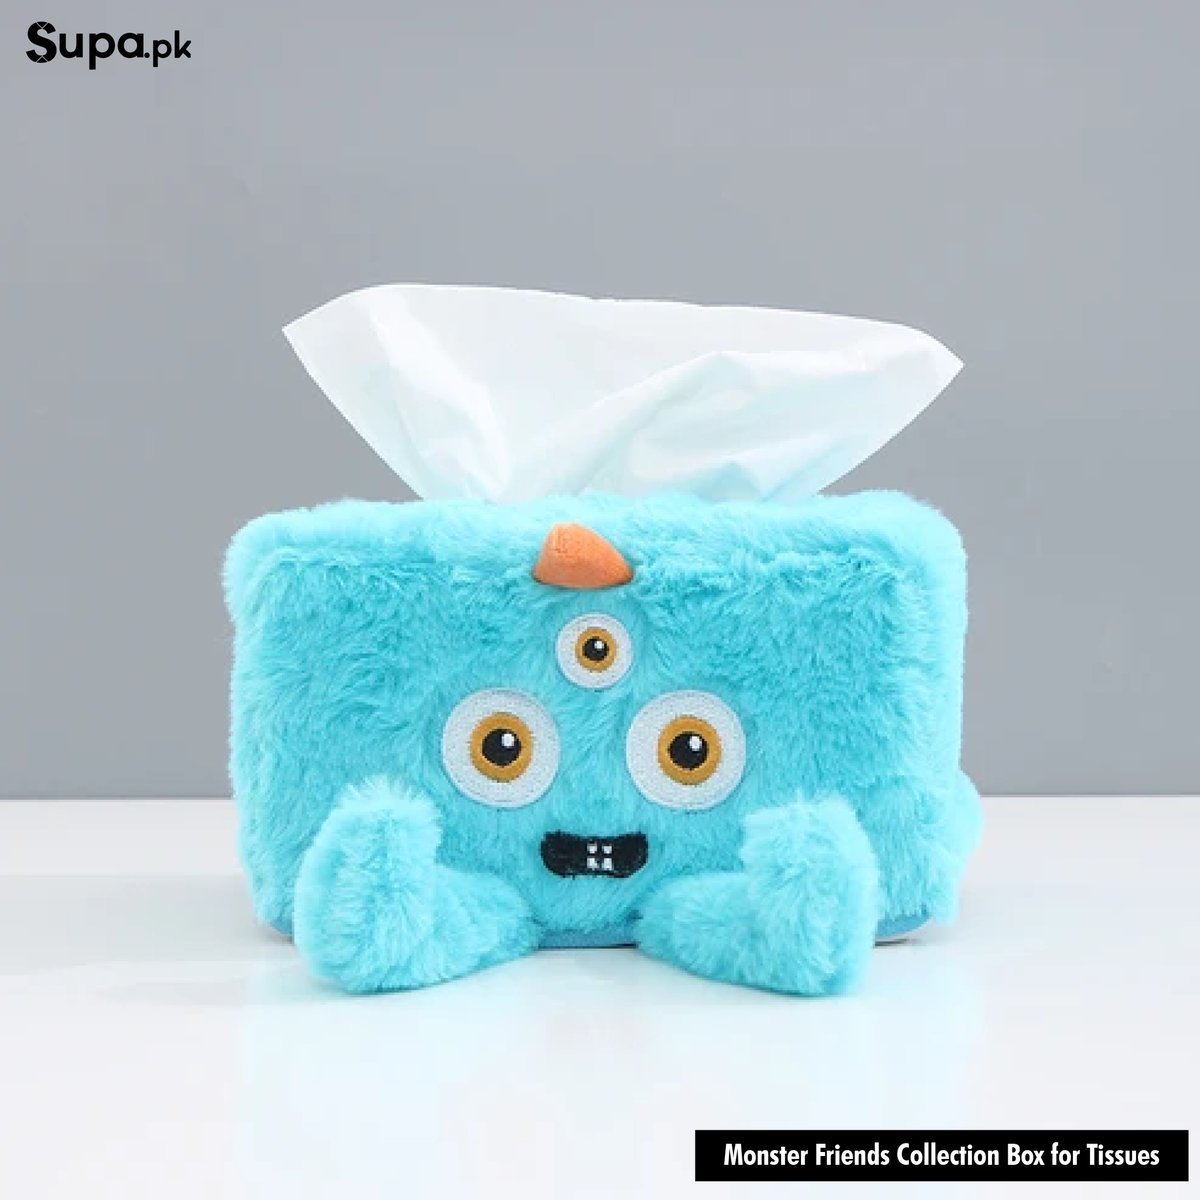 'The Comfortable Material Make The Tissue Box A Beautiful Home Décor.'

Order Now: bit.ly/3f1tbjt

#tissuebox #tempattissue #tempattisu #kotaktissue #kotaktisu 
#onlineshop #superiorshopping #onlineshopping #supa #supapk